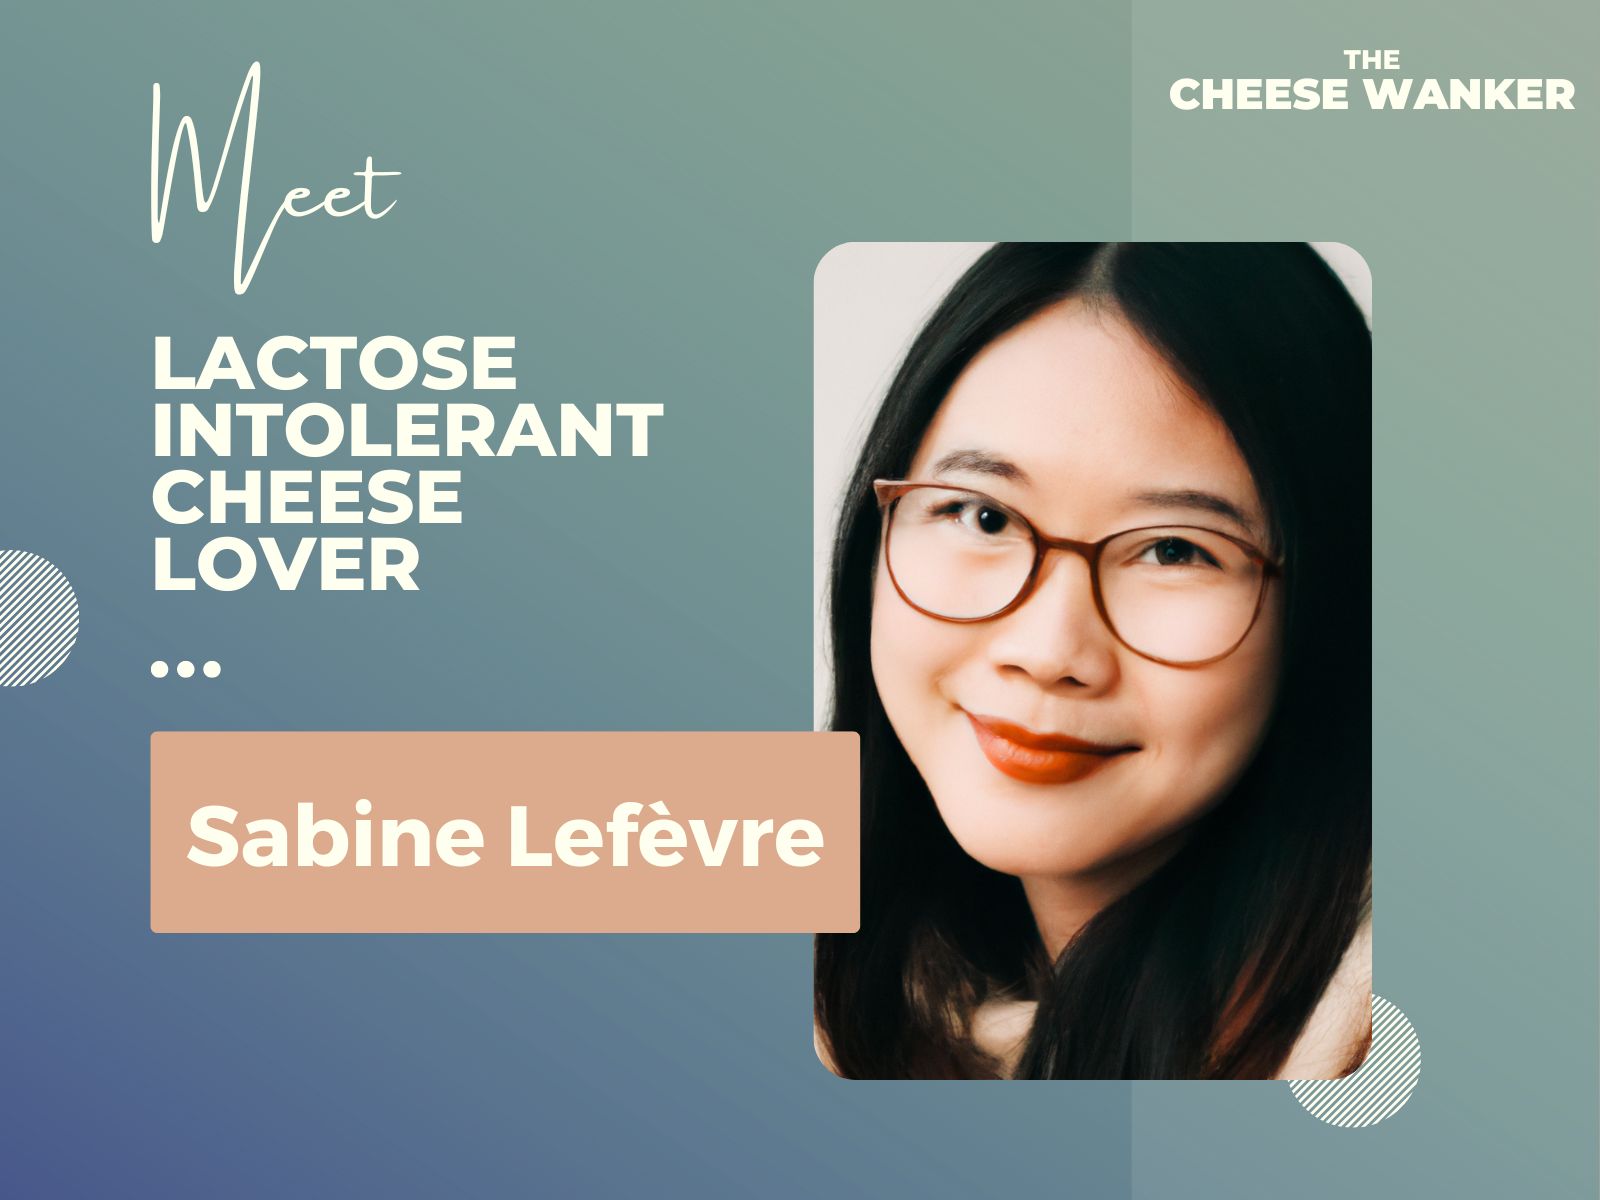 Sabine the Lactose Intolerant Cheese Lover